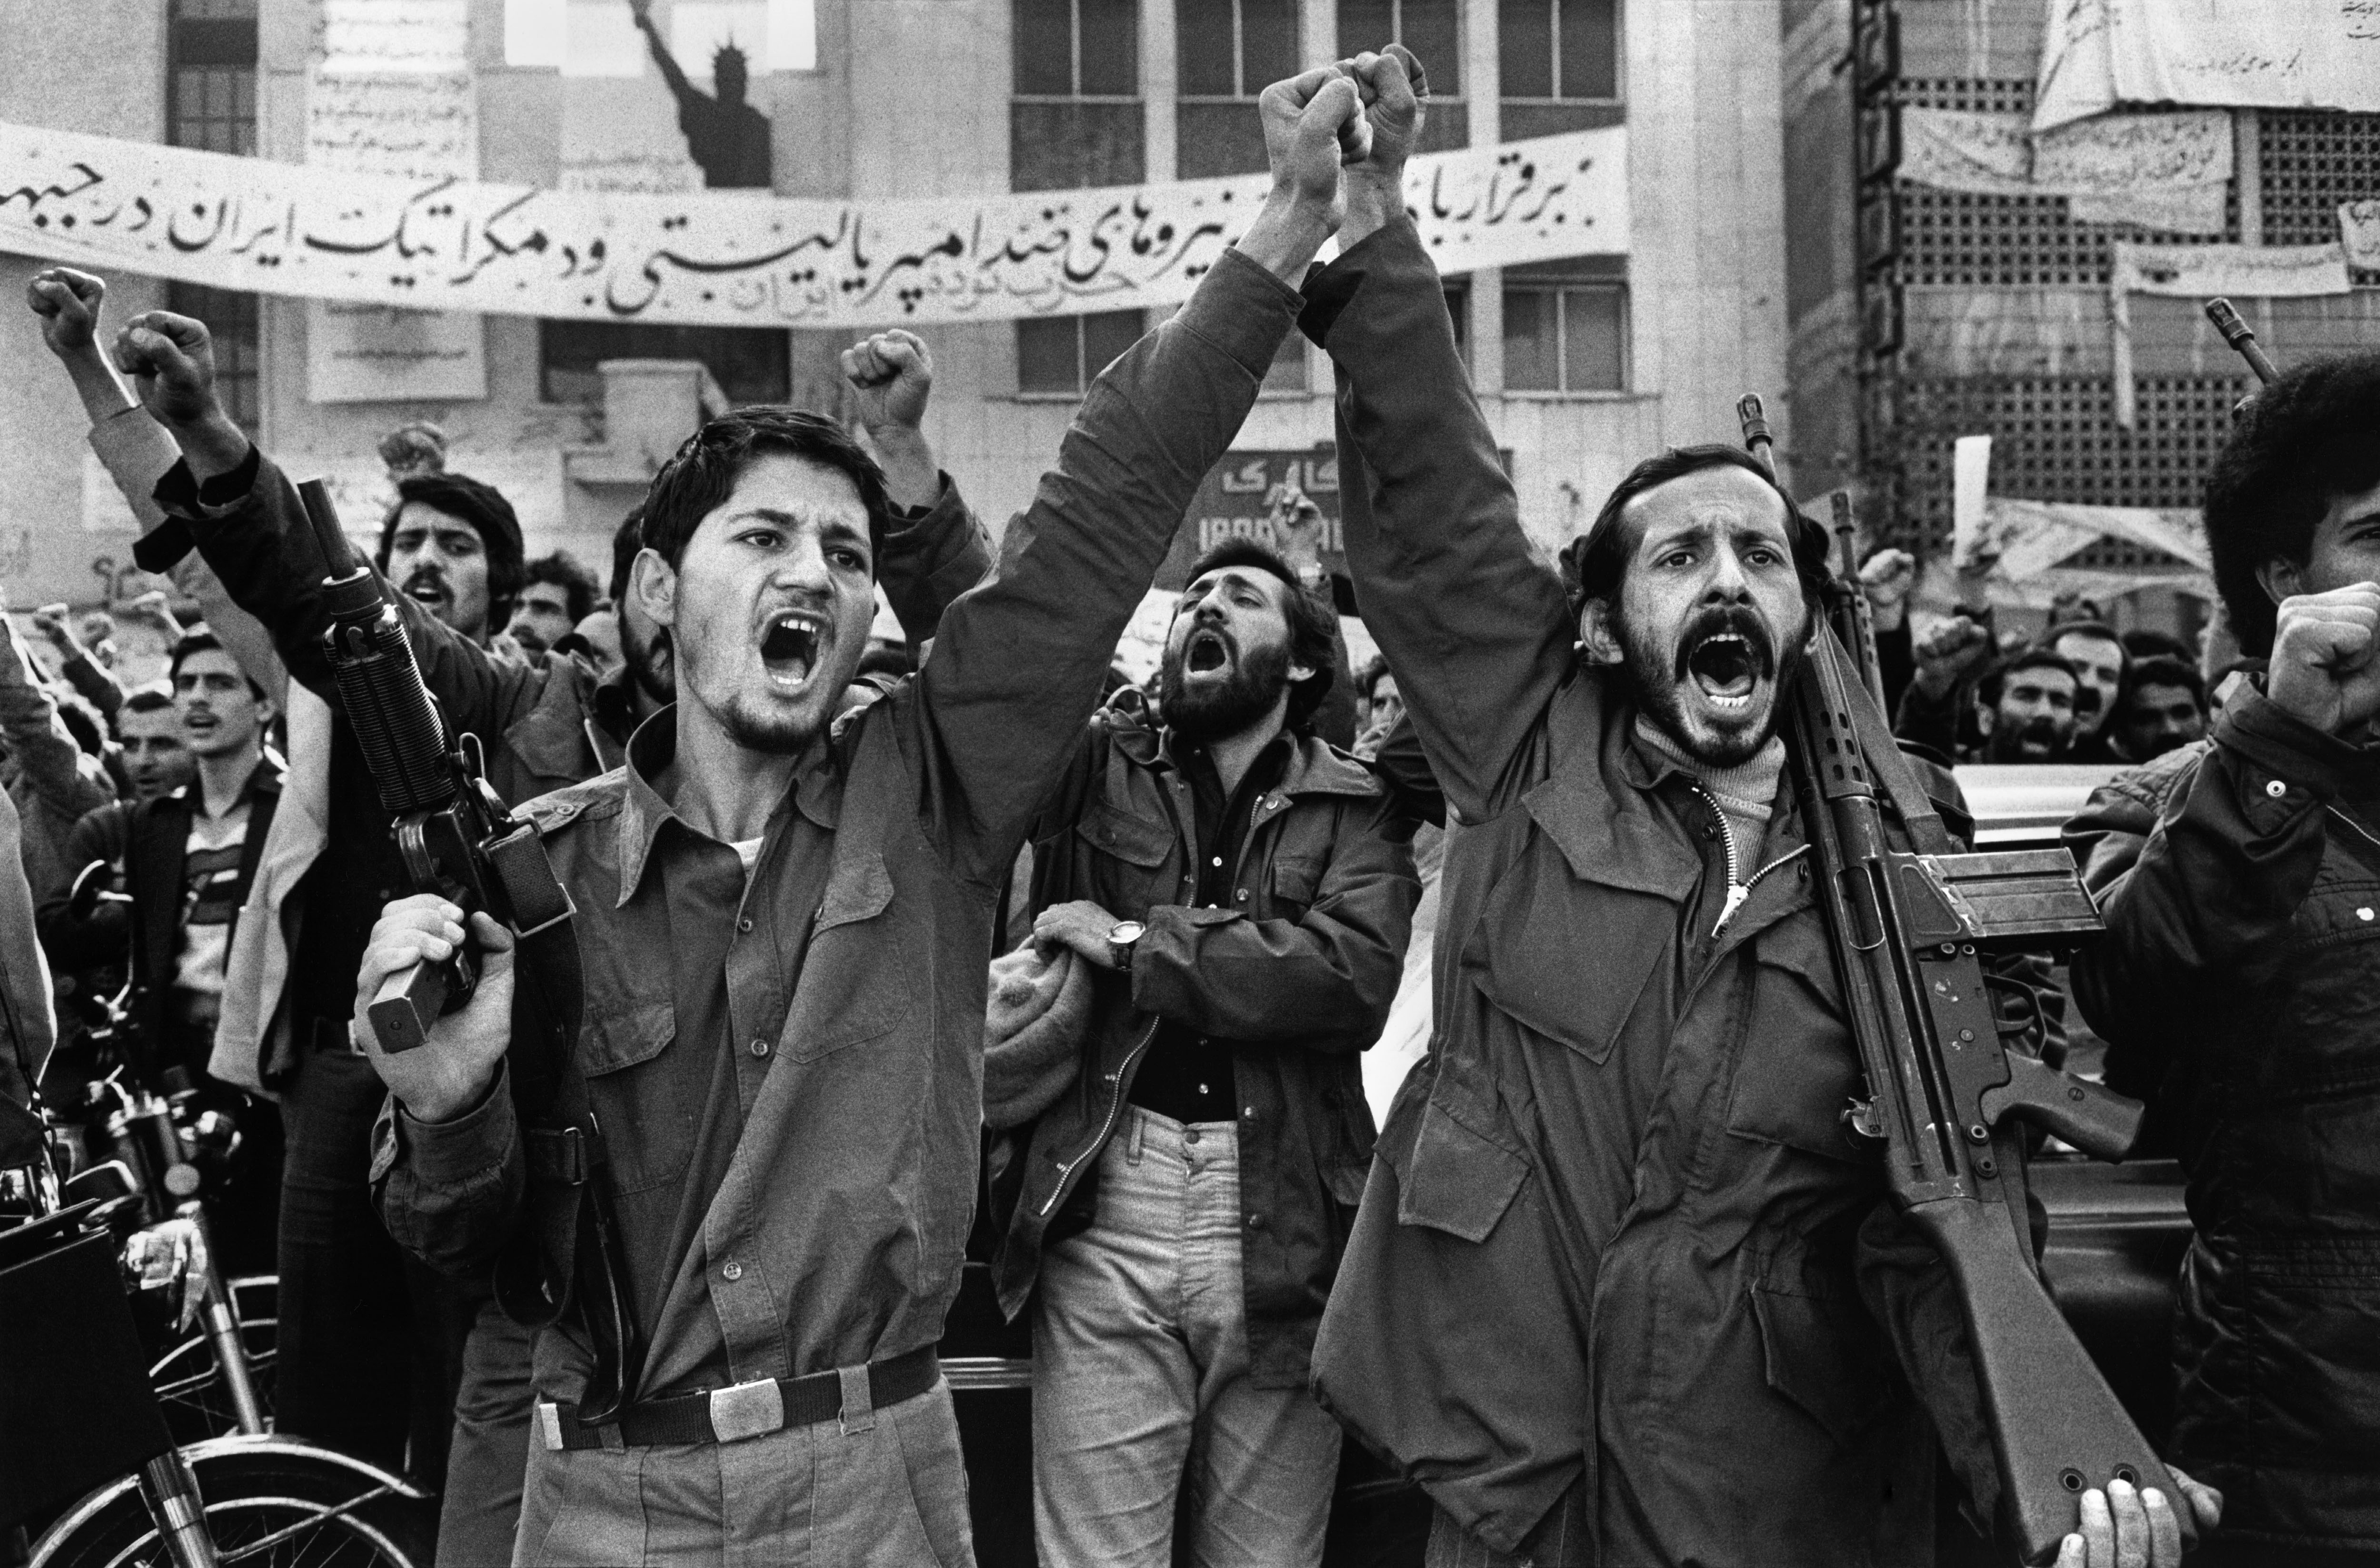 Two armed militants outside the Embassy of the United States in Tehran. Behind them is a banner that says: "Long live anti-imperialism and democratic forces", 1979.